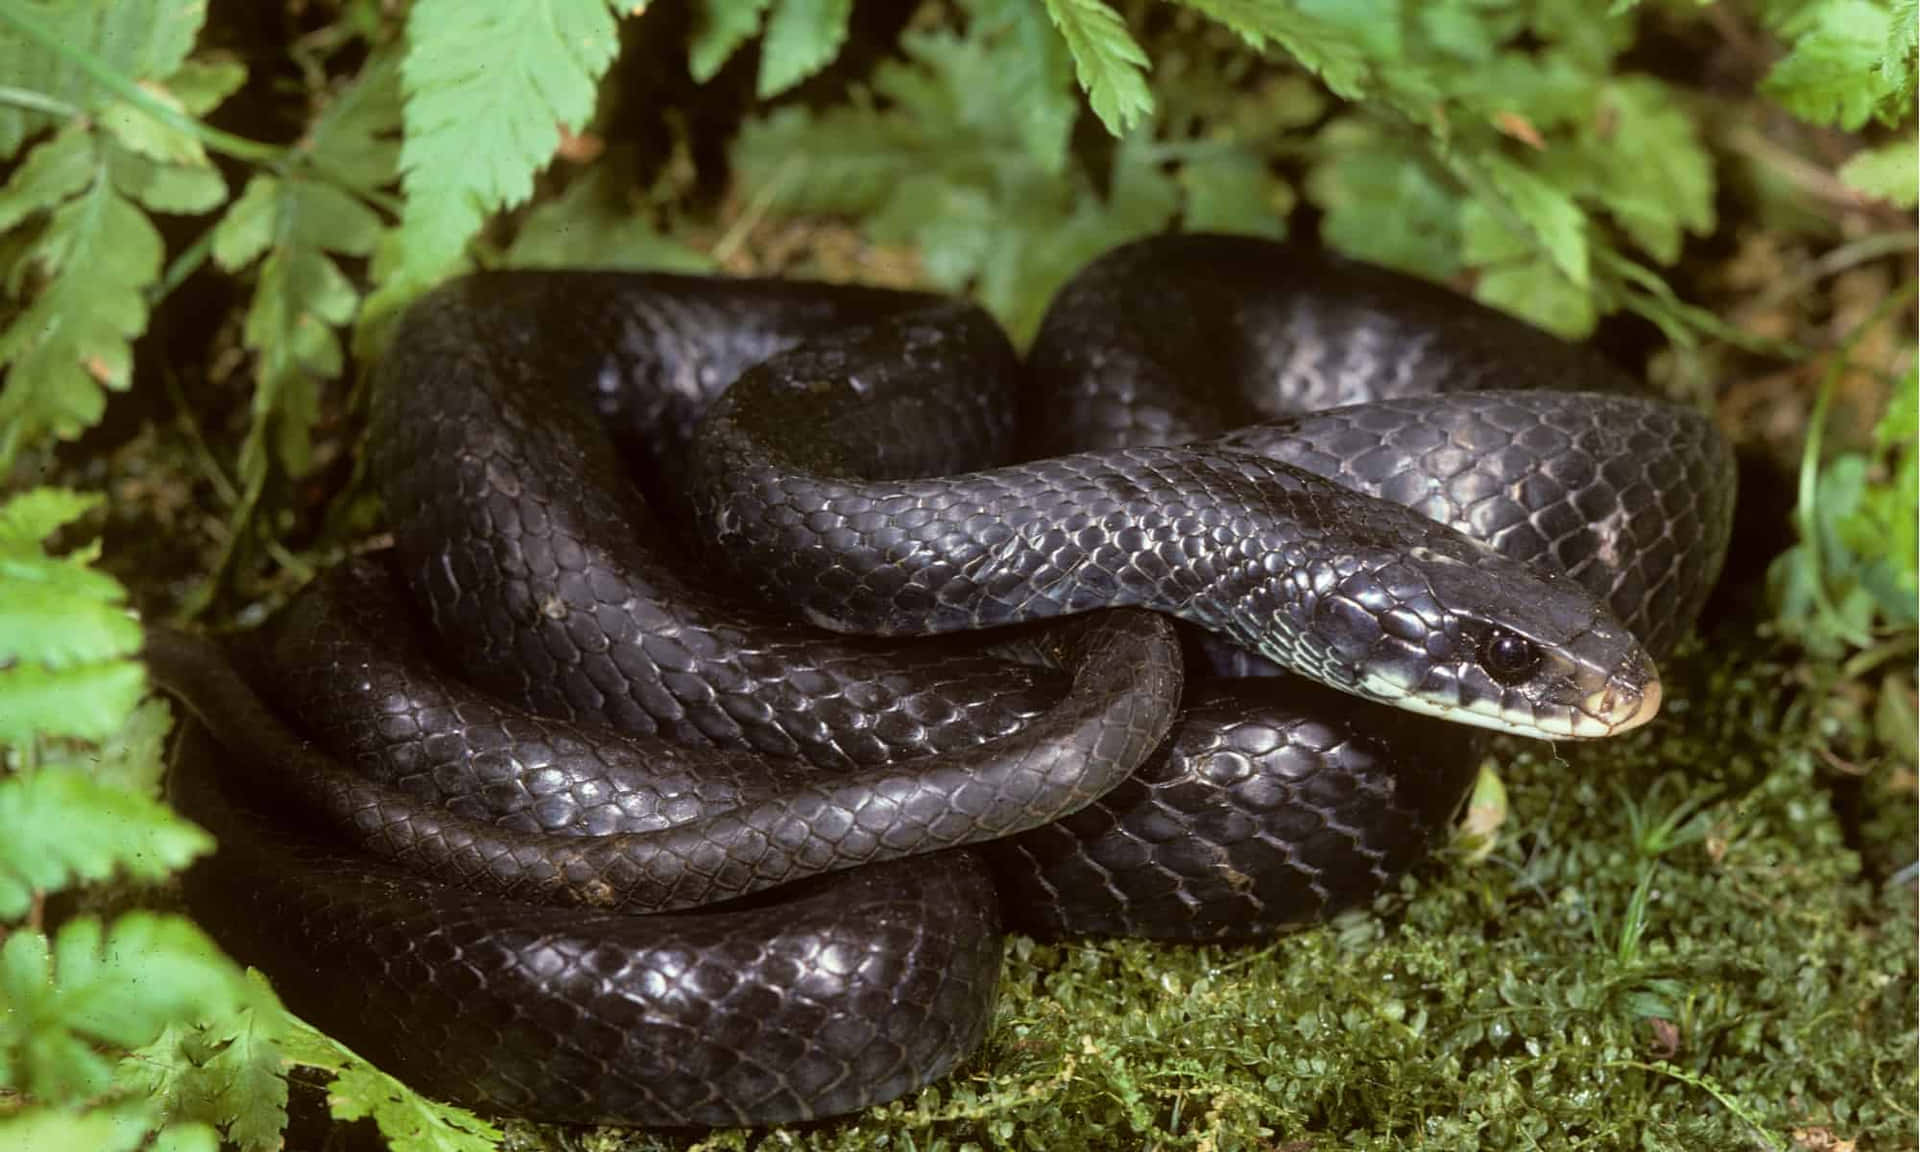 A Black Snake Is Laying On The Ground